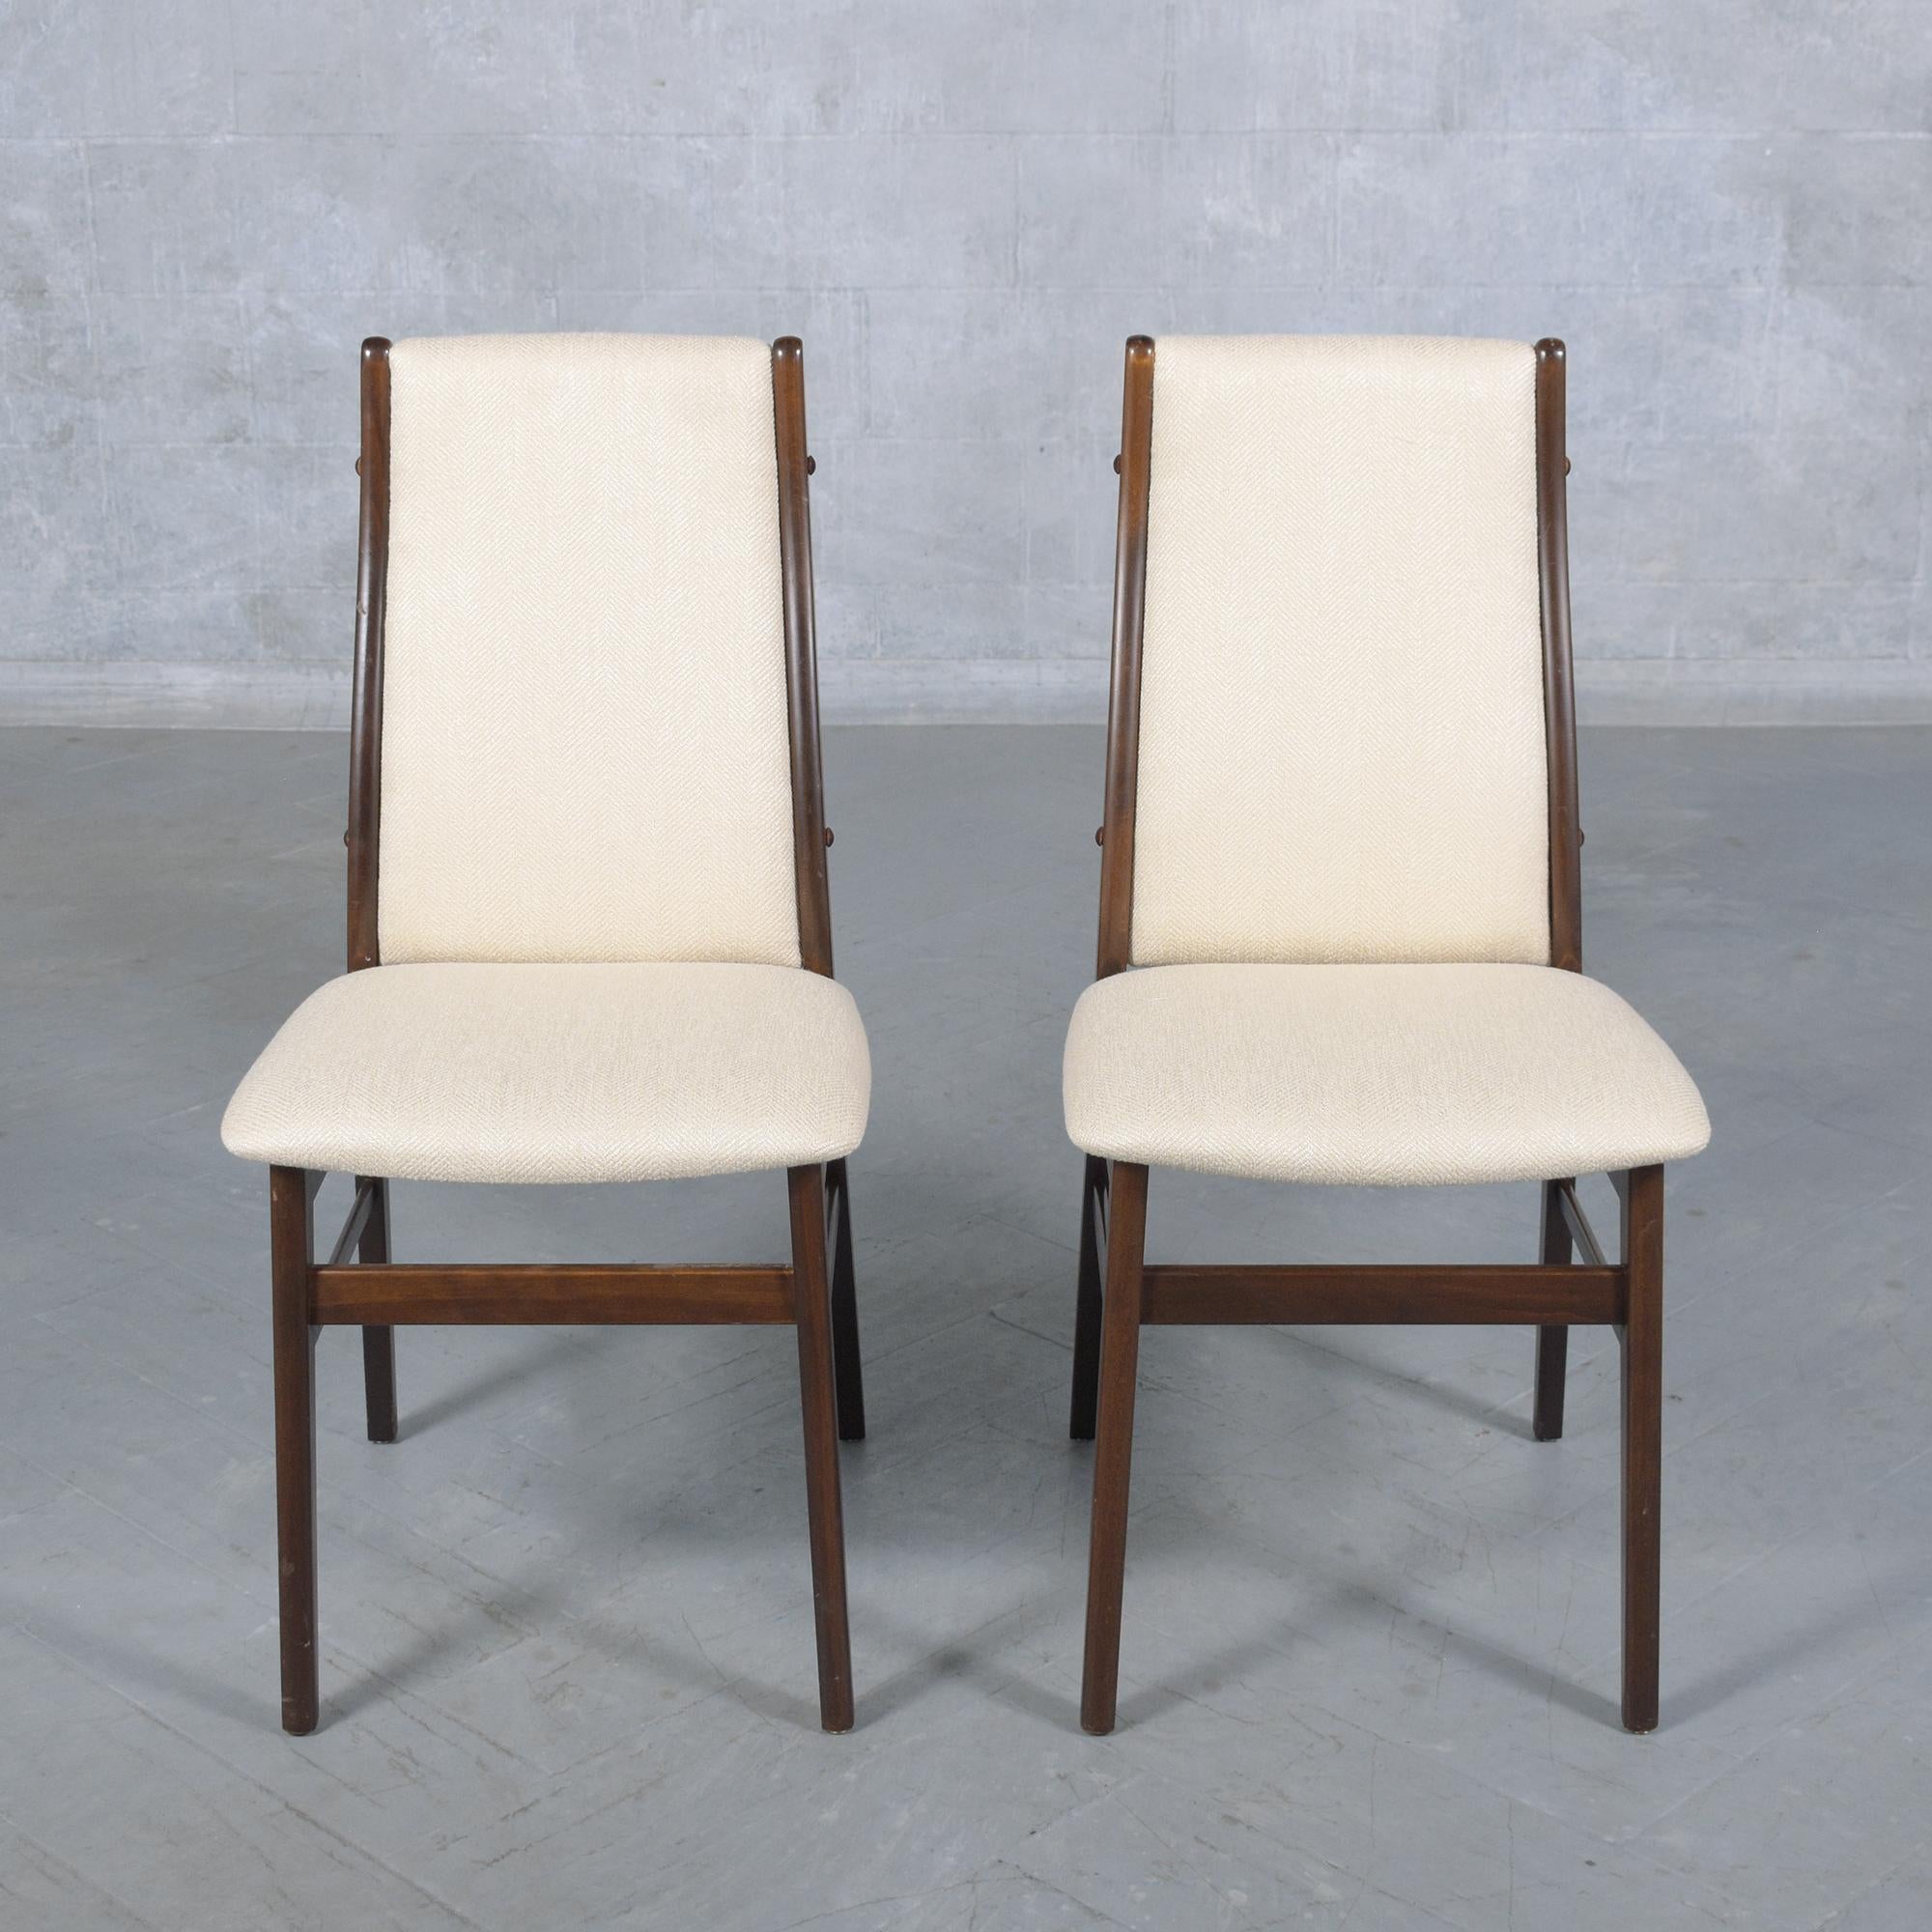 Carved Exquisite Danish Teak Dining Chairs, Restored and Refined For Sale